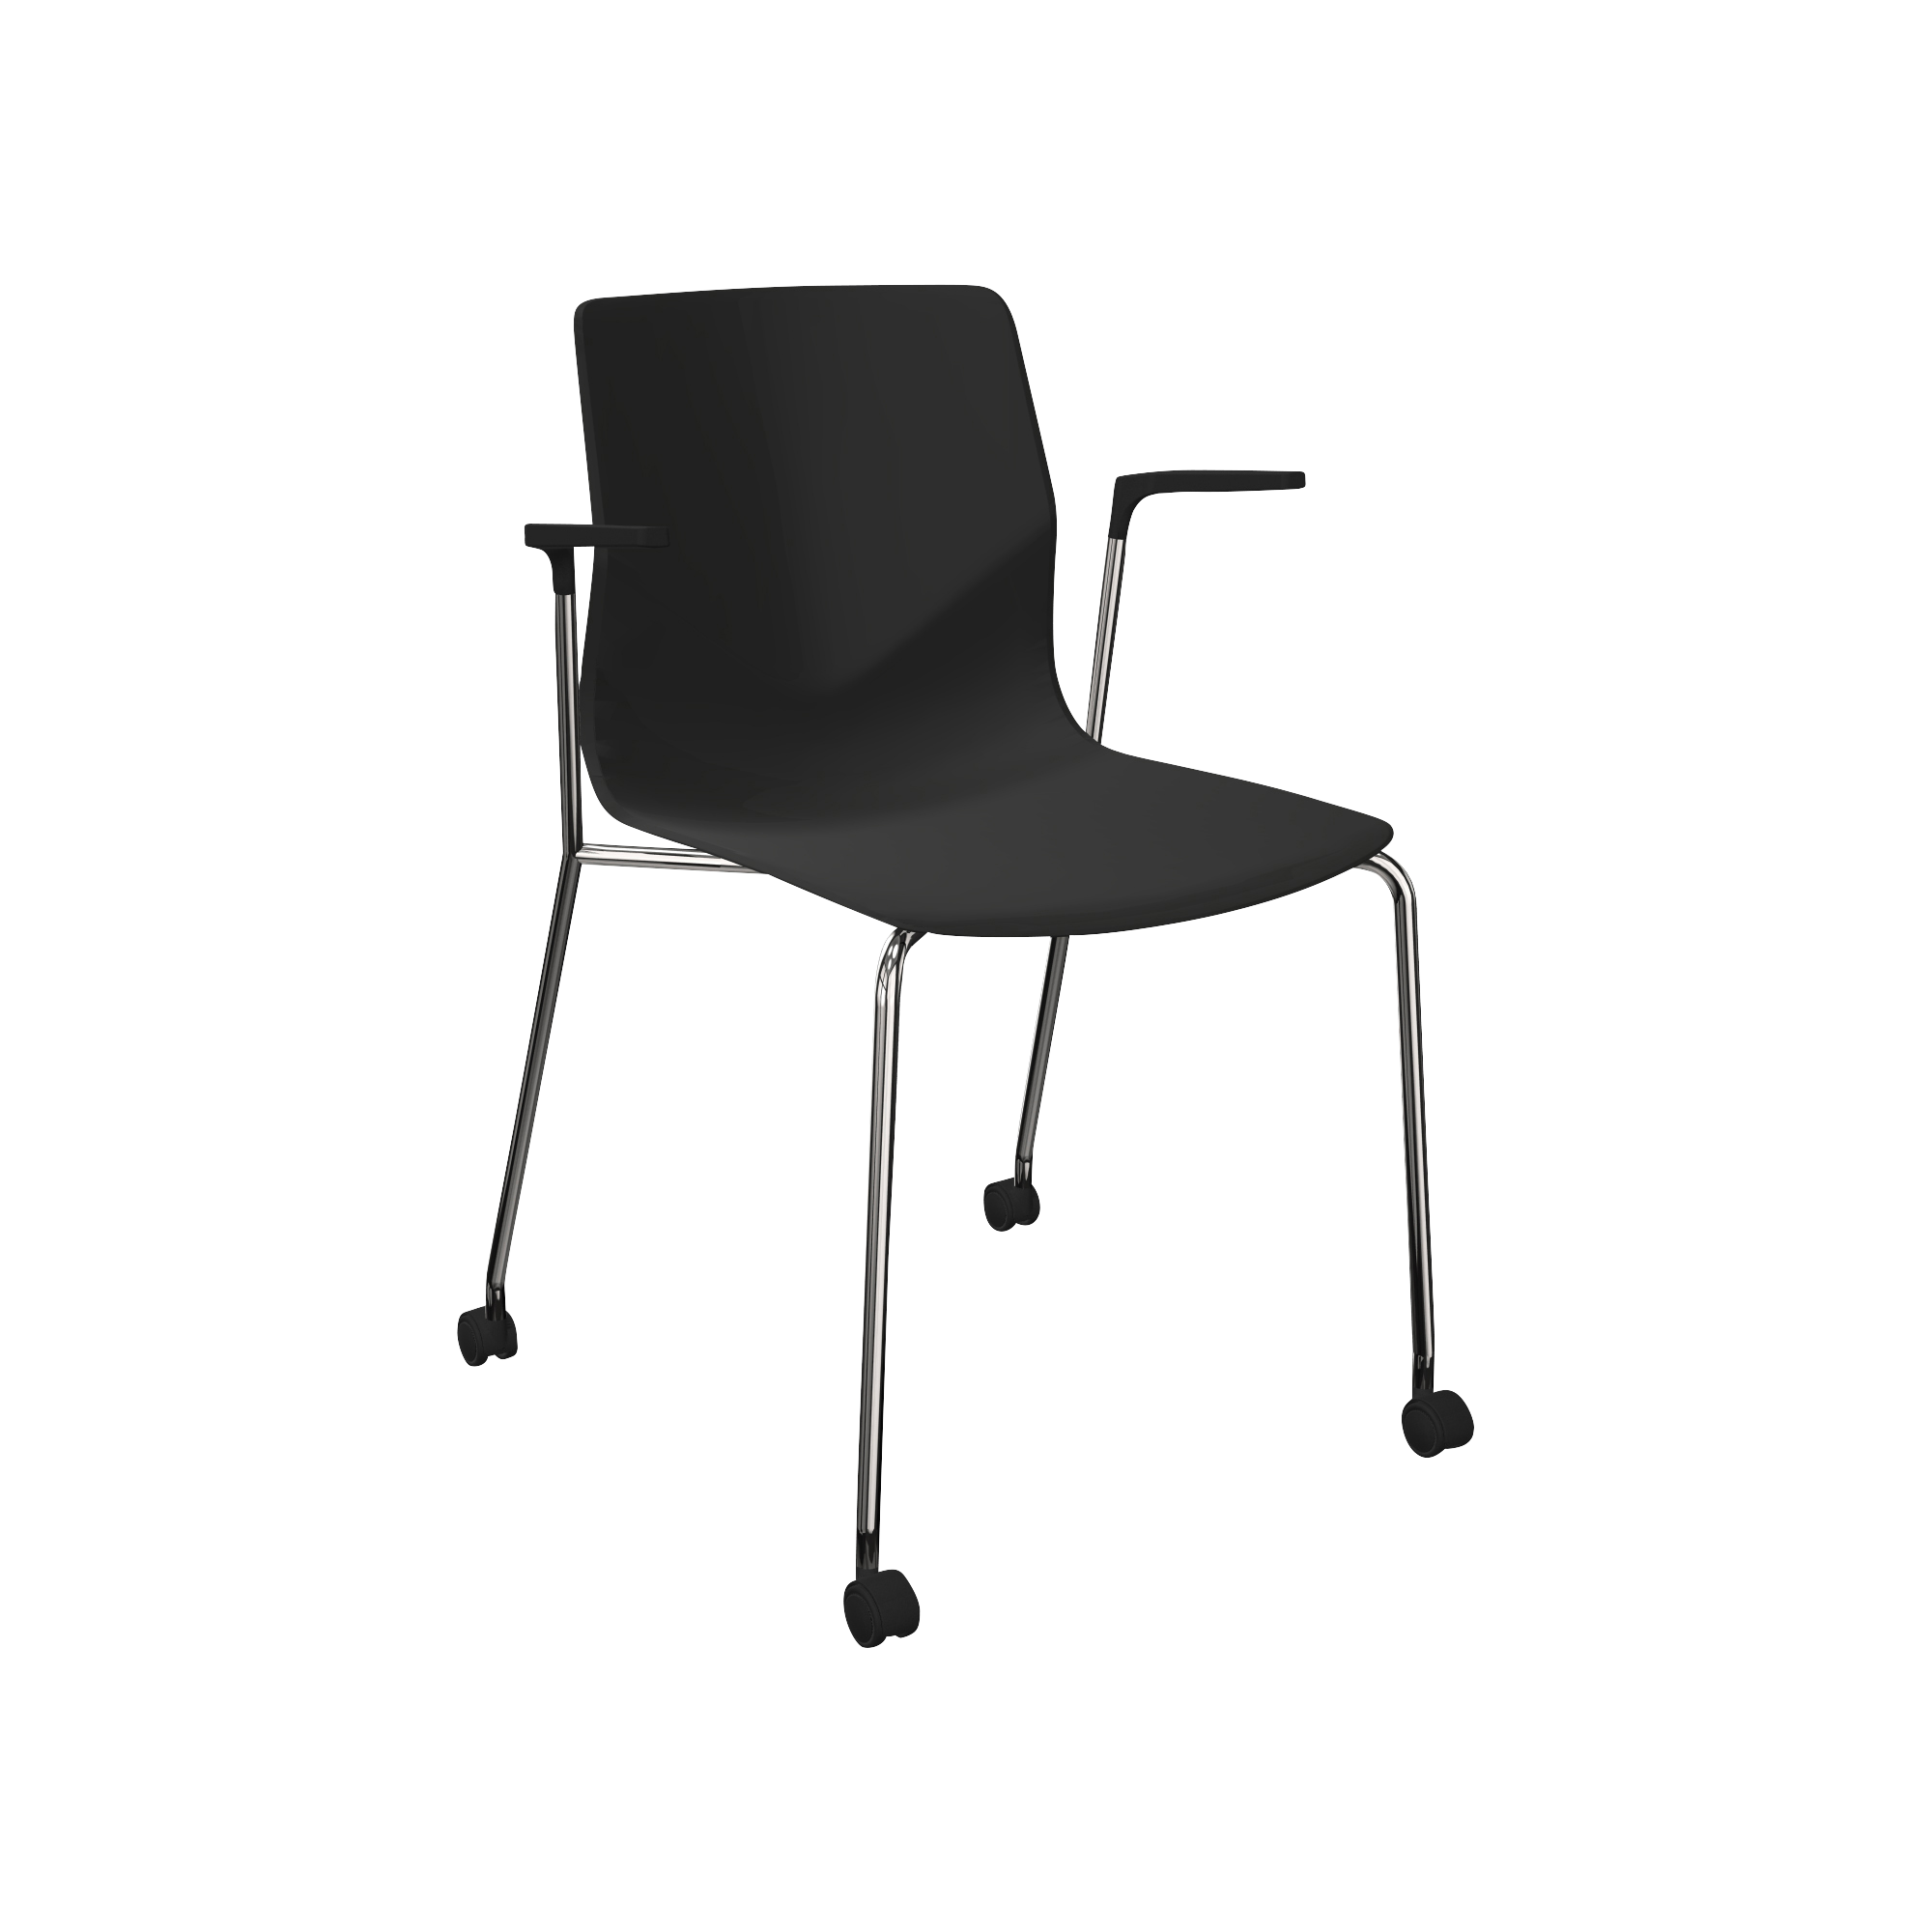 A black plastic chair with casters